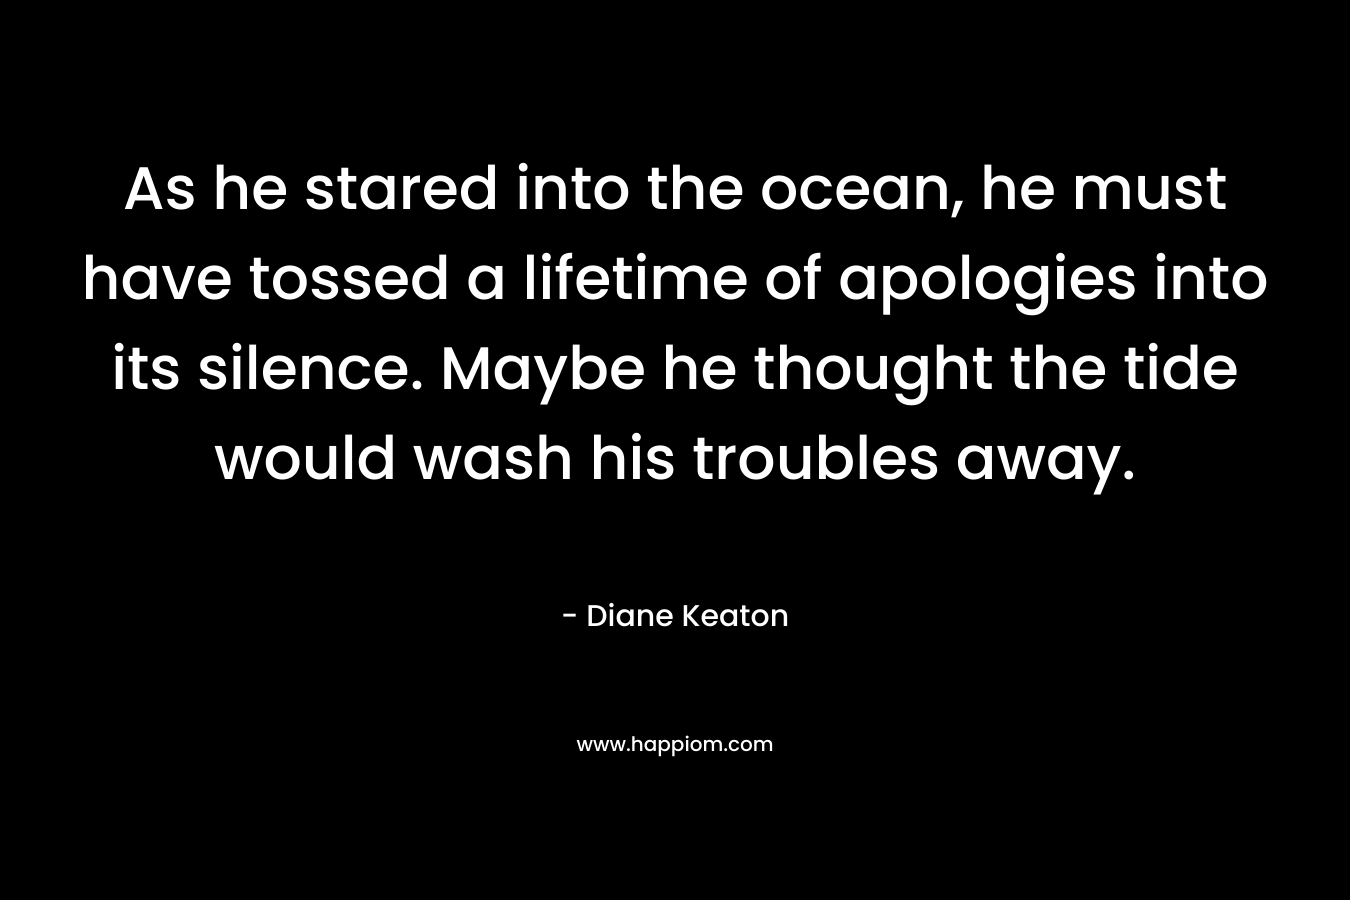 As he stared into the ocean, he must have tossed a lifetime of apologies into its silence. Maybe he thought the tide would wash his troubles away. – Diane Keaton